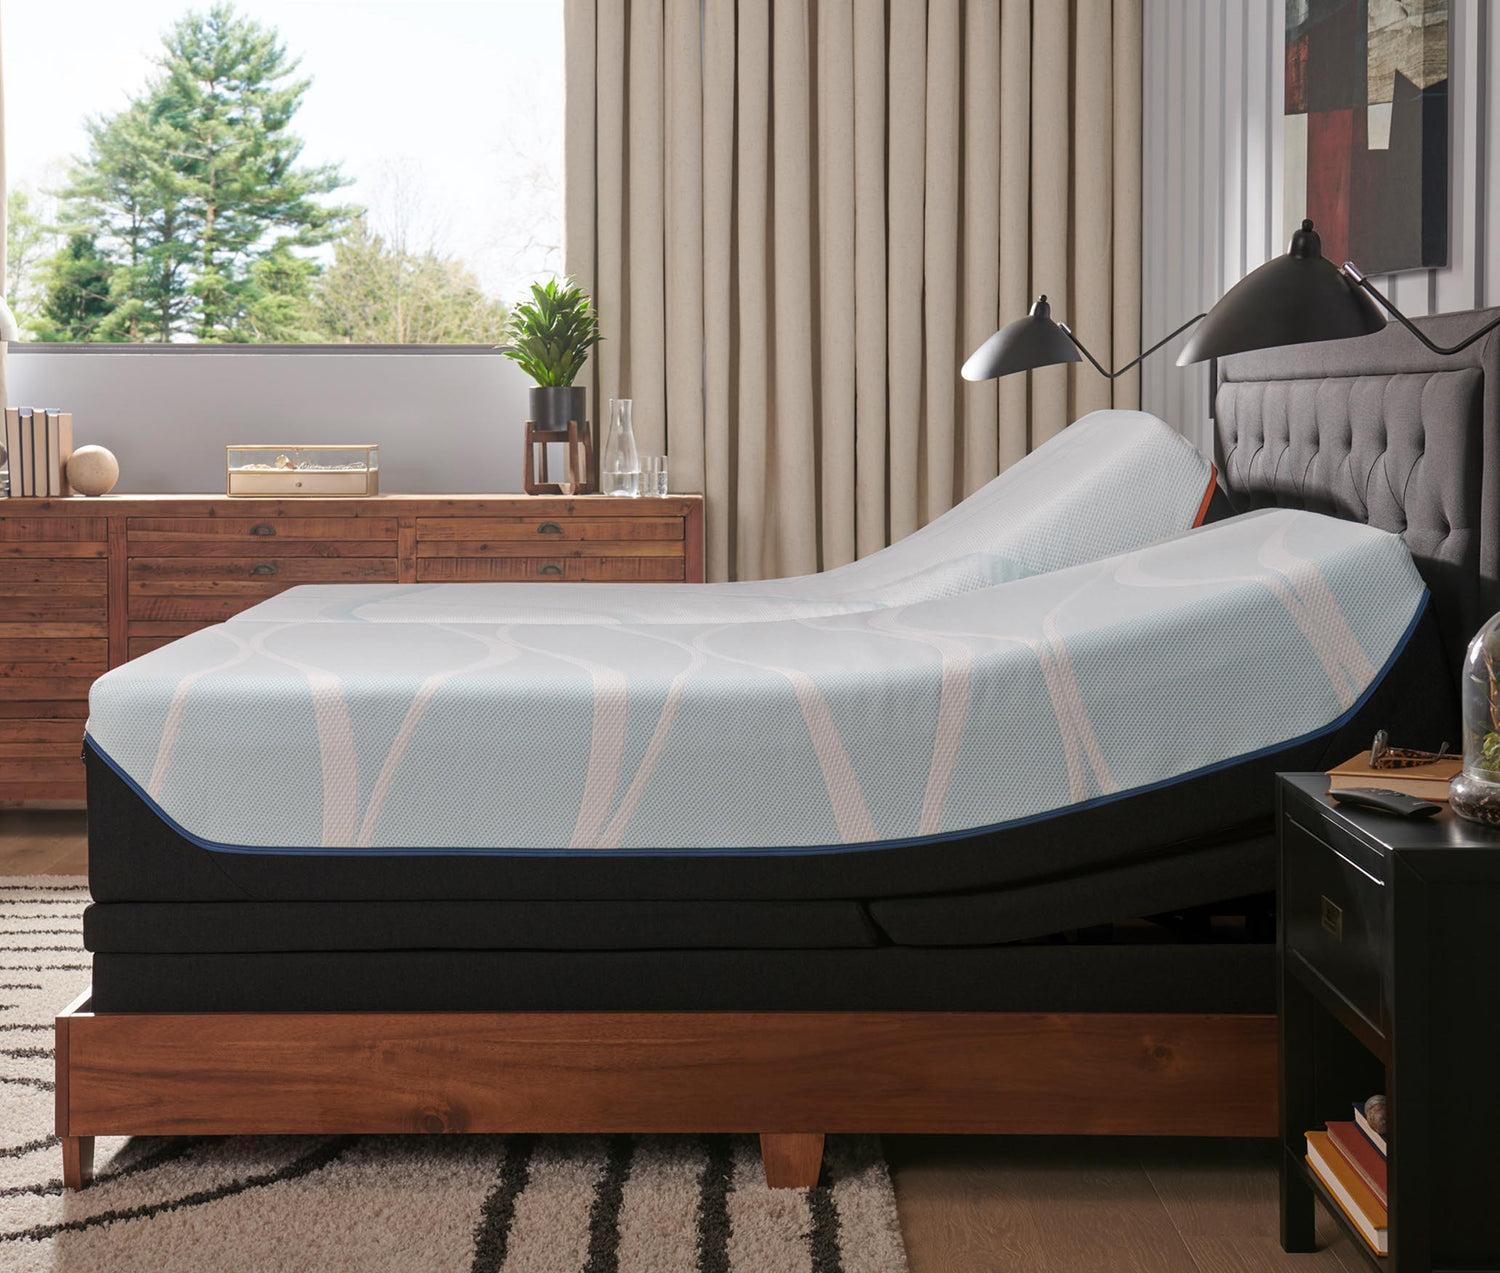 Adjustable foundation with a mattress on top